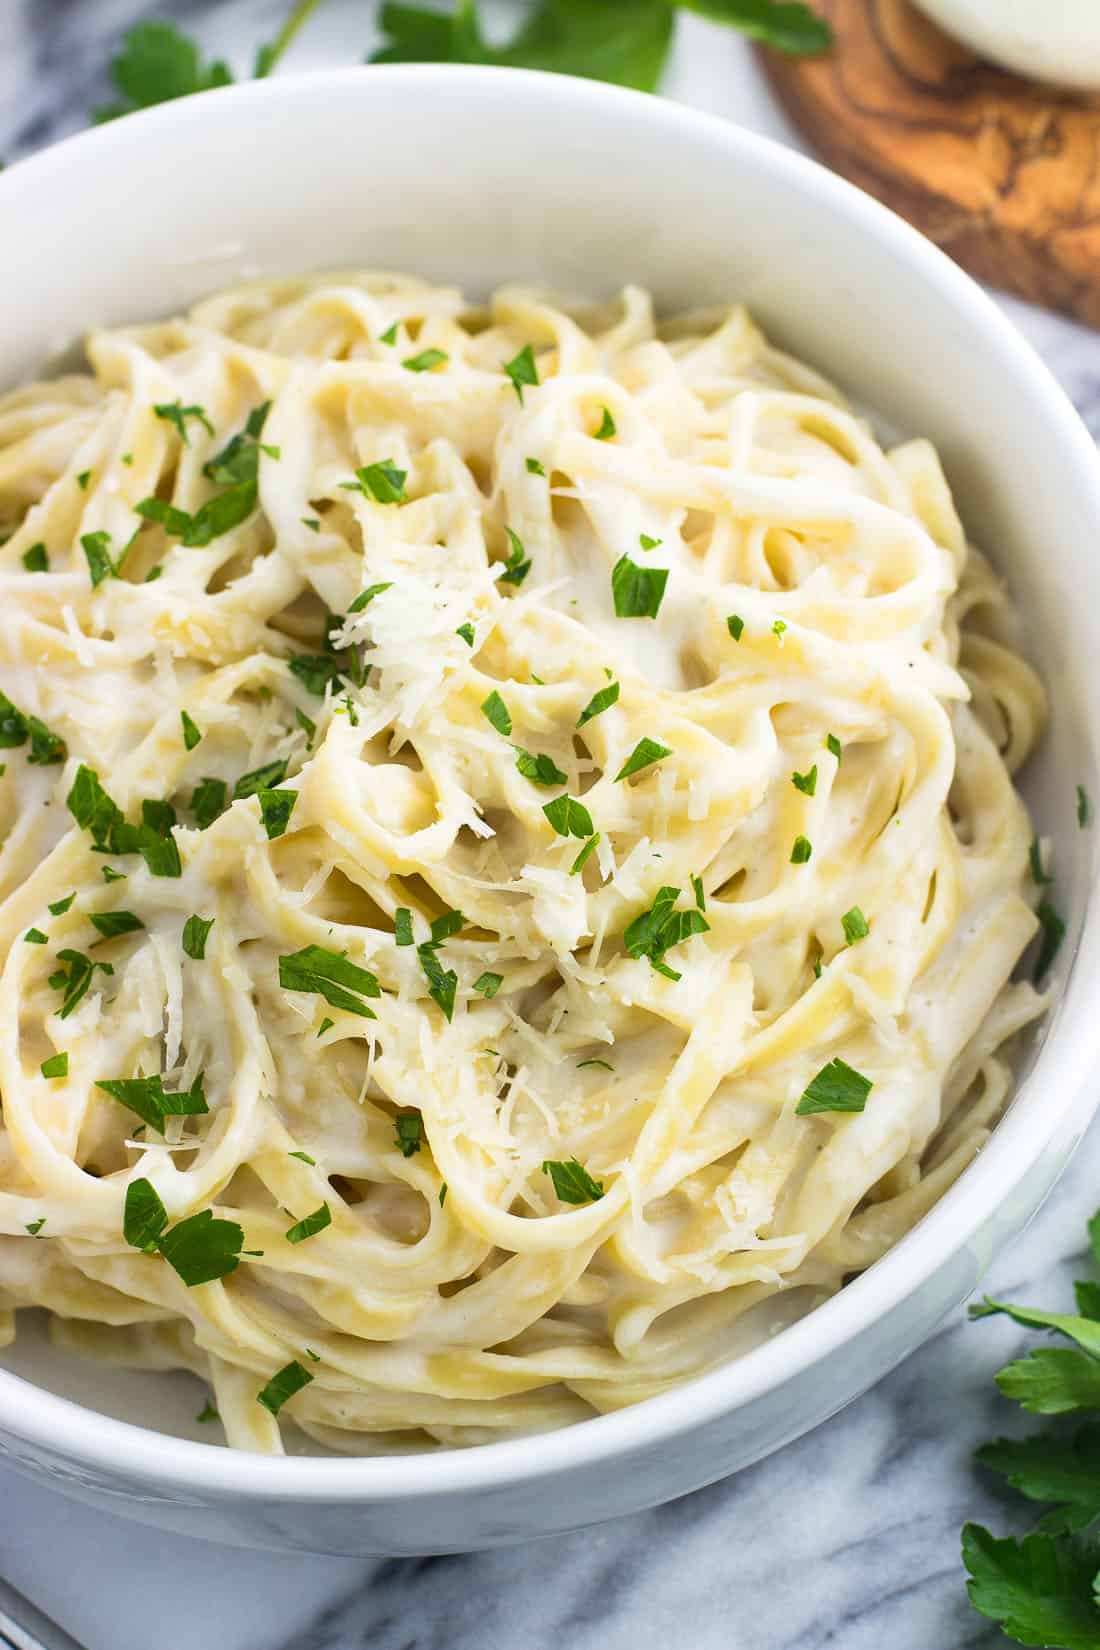 A close-up picture of healthy alfredo sauce on pasta in a serving bowl.